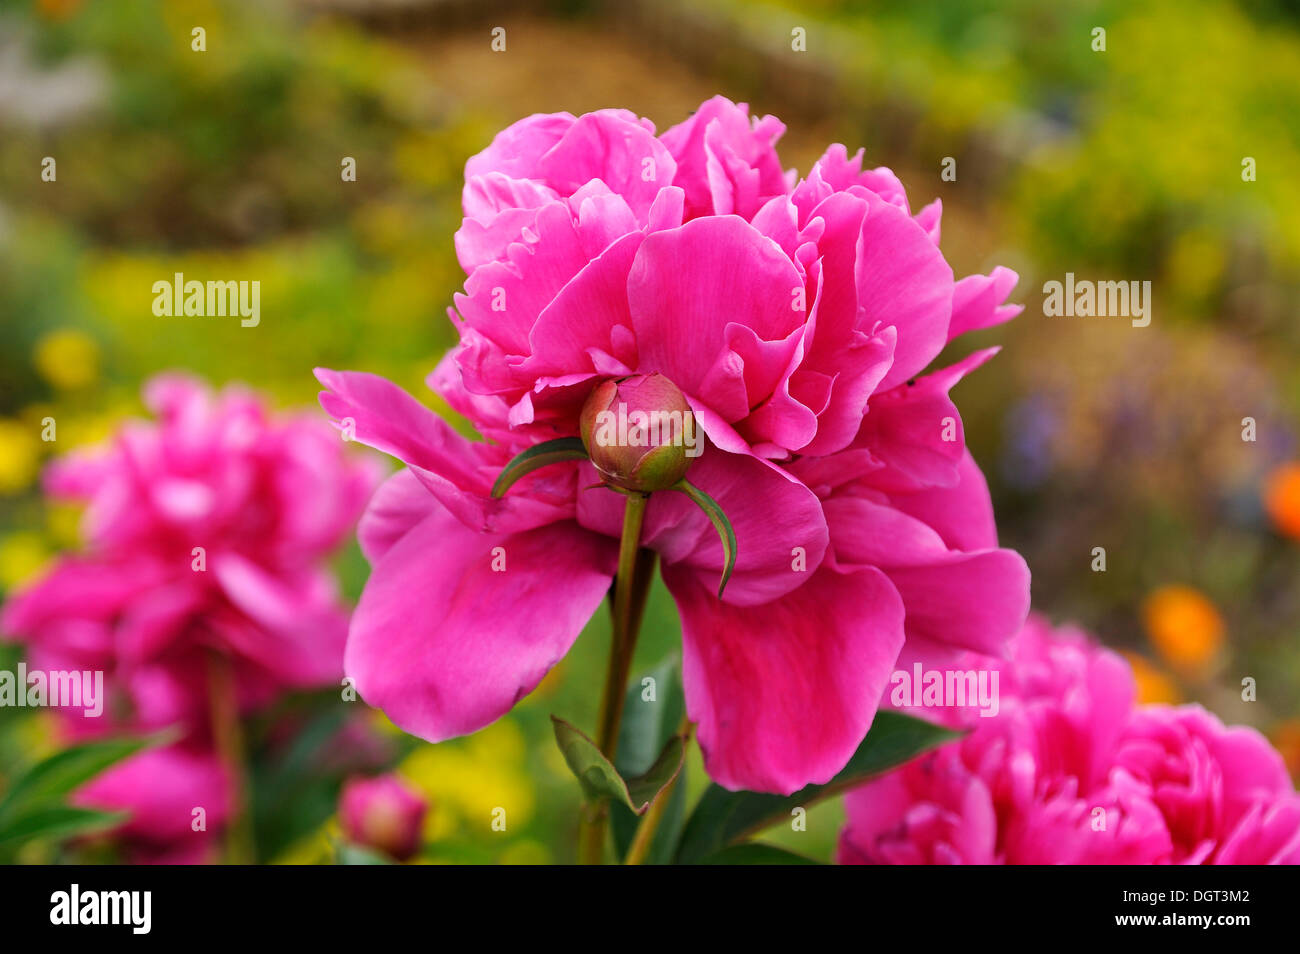 Pink peonies (Paeonia) with buds, Othenstorf, Mecklenburg-Western Pomerania Stock Photo